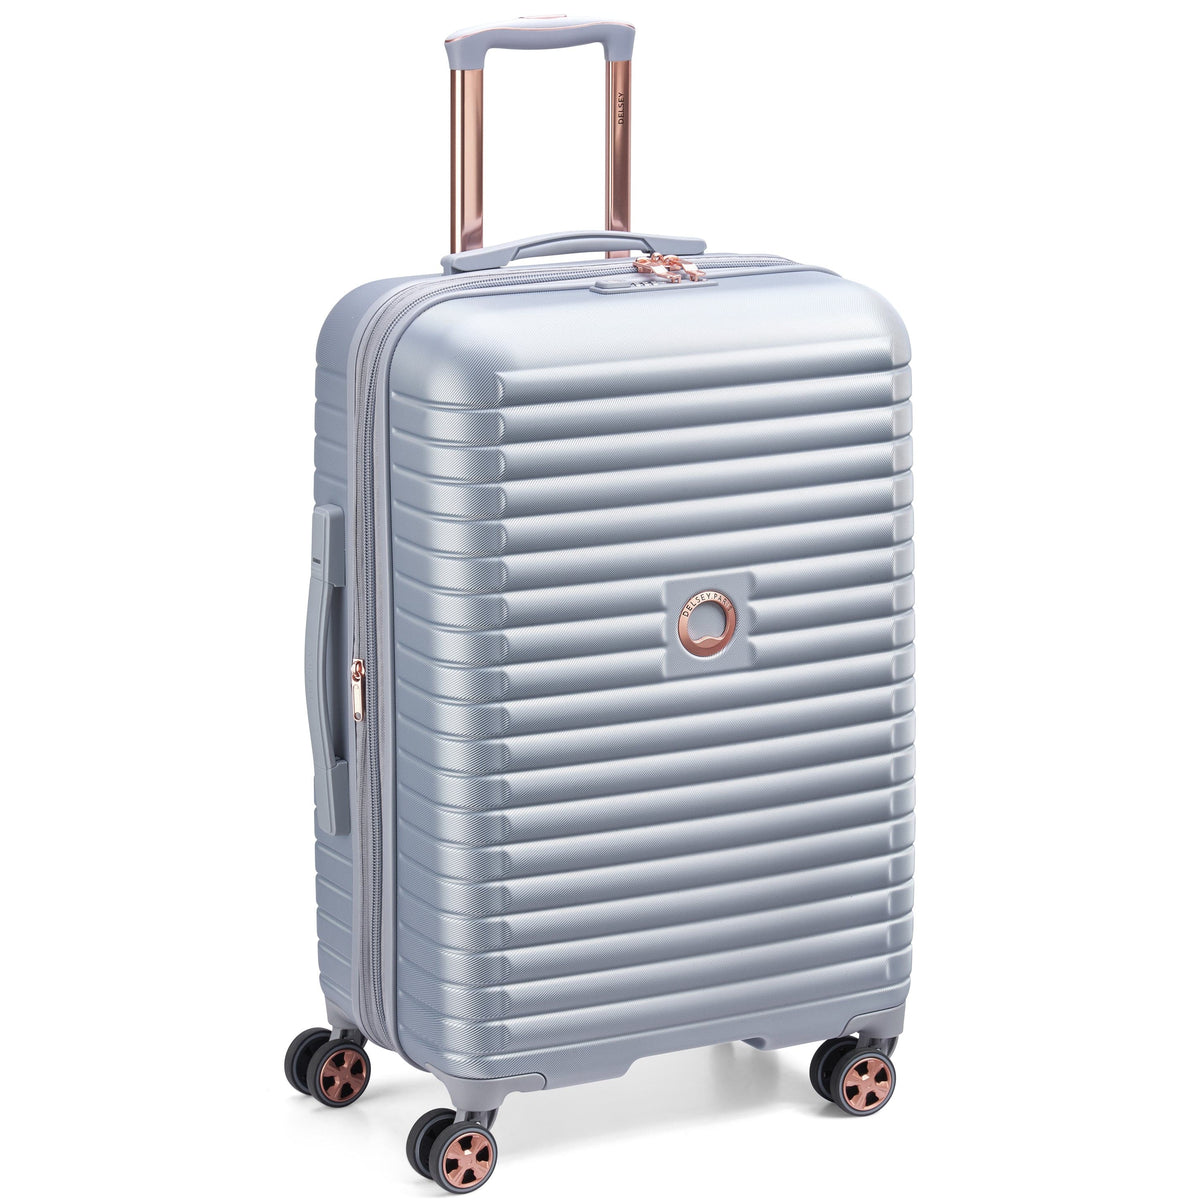 Delsey Cruise 3.0 Checked Expandable Spinner - 24" Medium